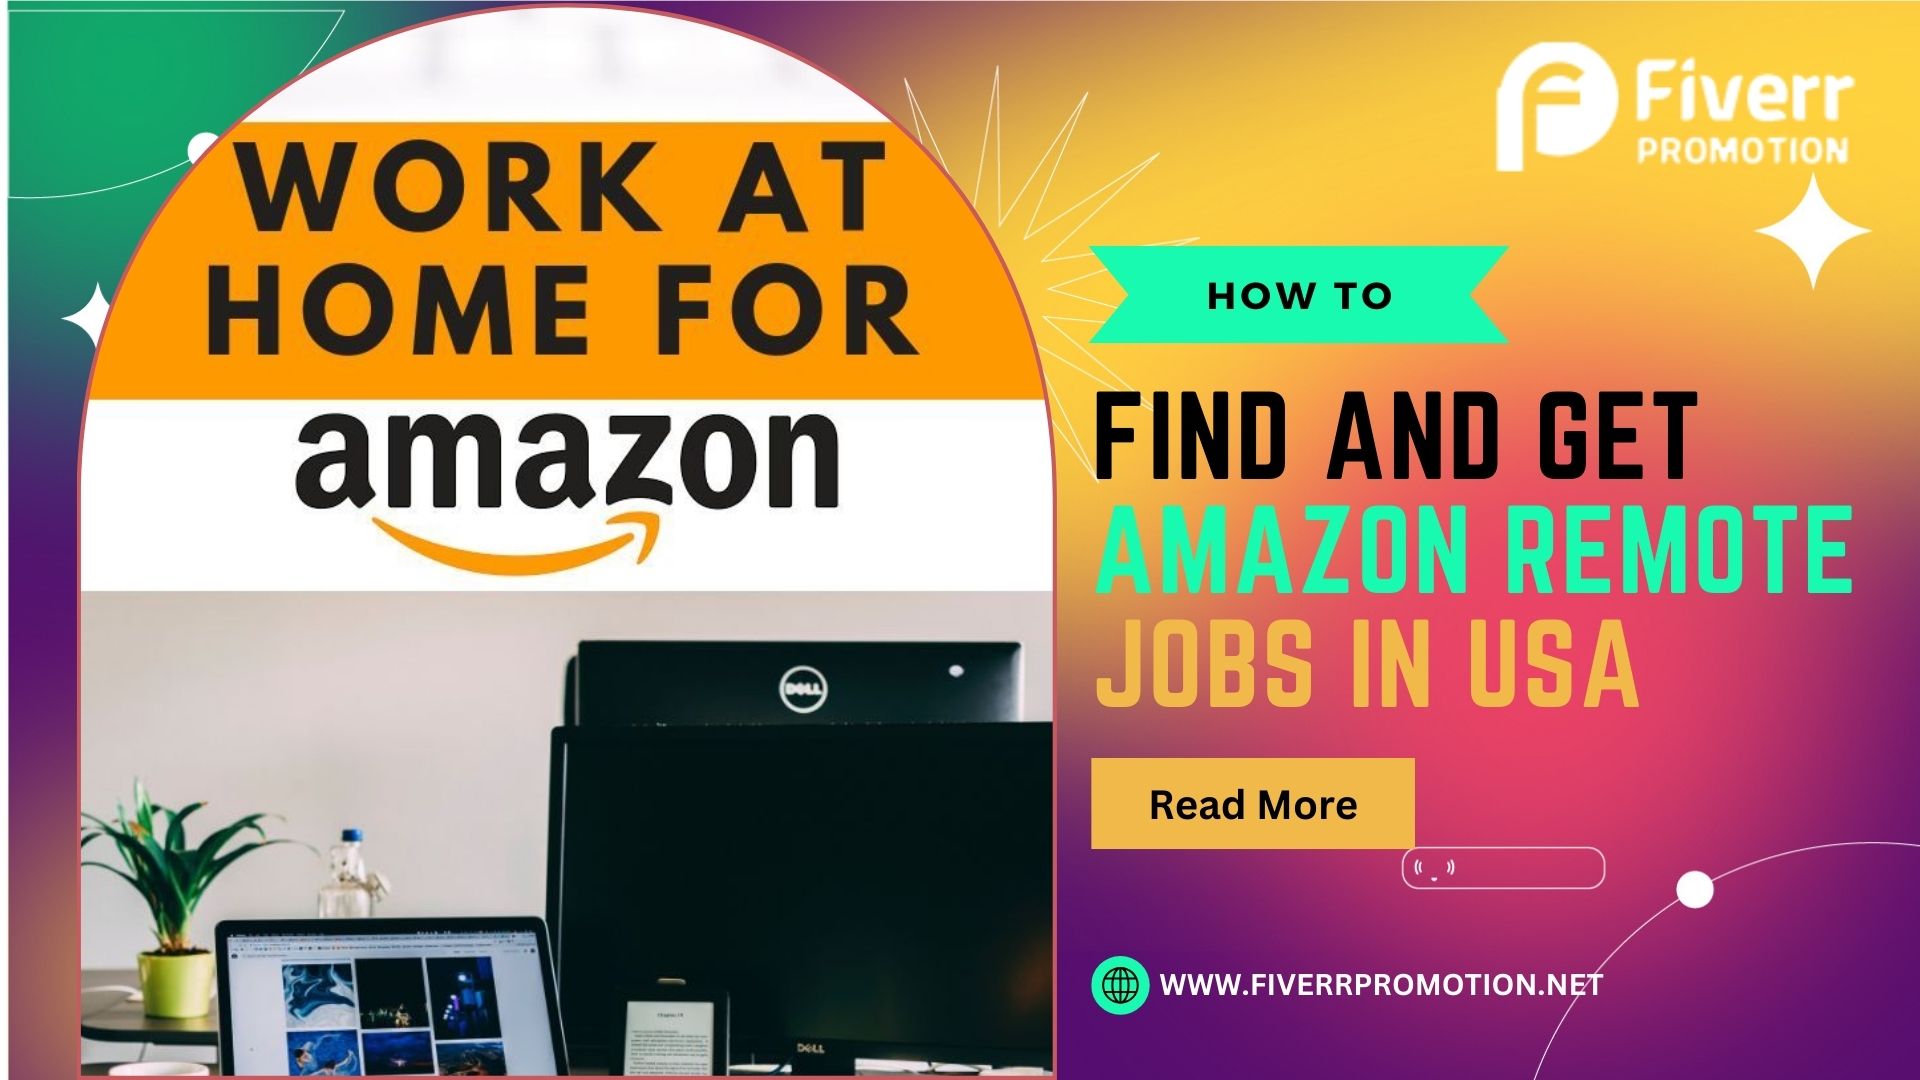 How to Find and Get Amazon Remote Jobs in USA